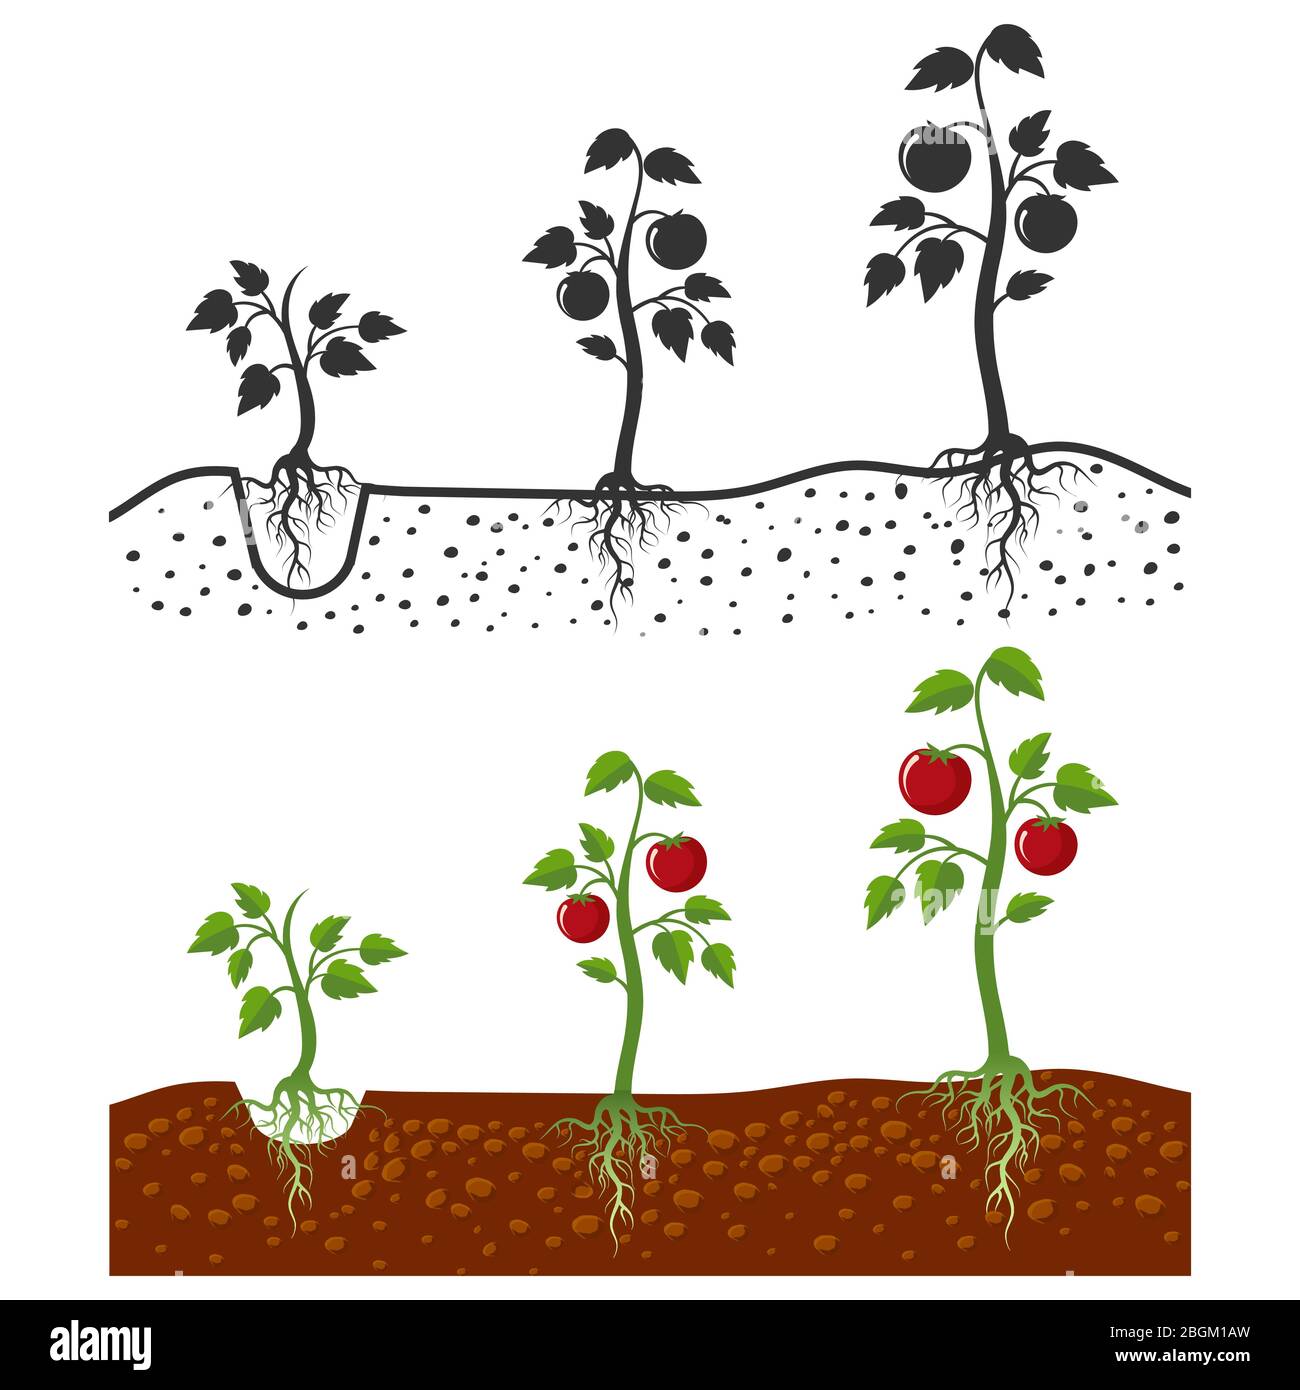 Tomato plant with roots vector growing stages - cartoon style and silhouettes of tomatoes isolated on white background. Vegetable tomato growing, agri Stock Vector